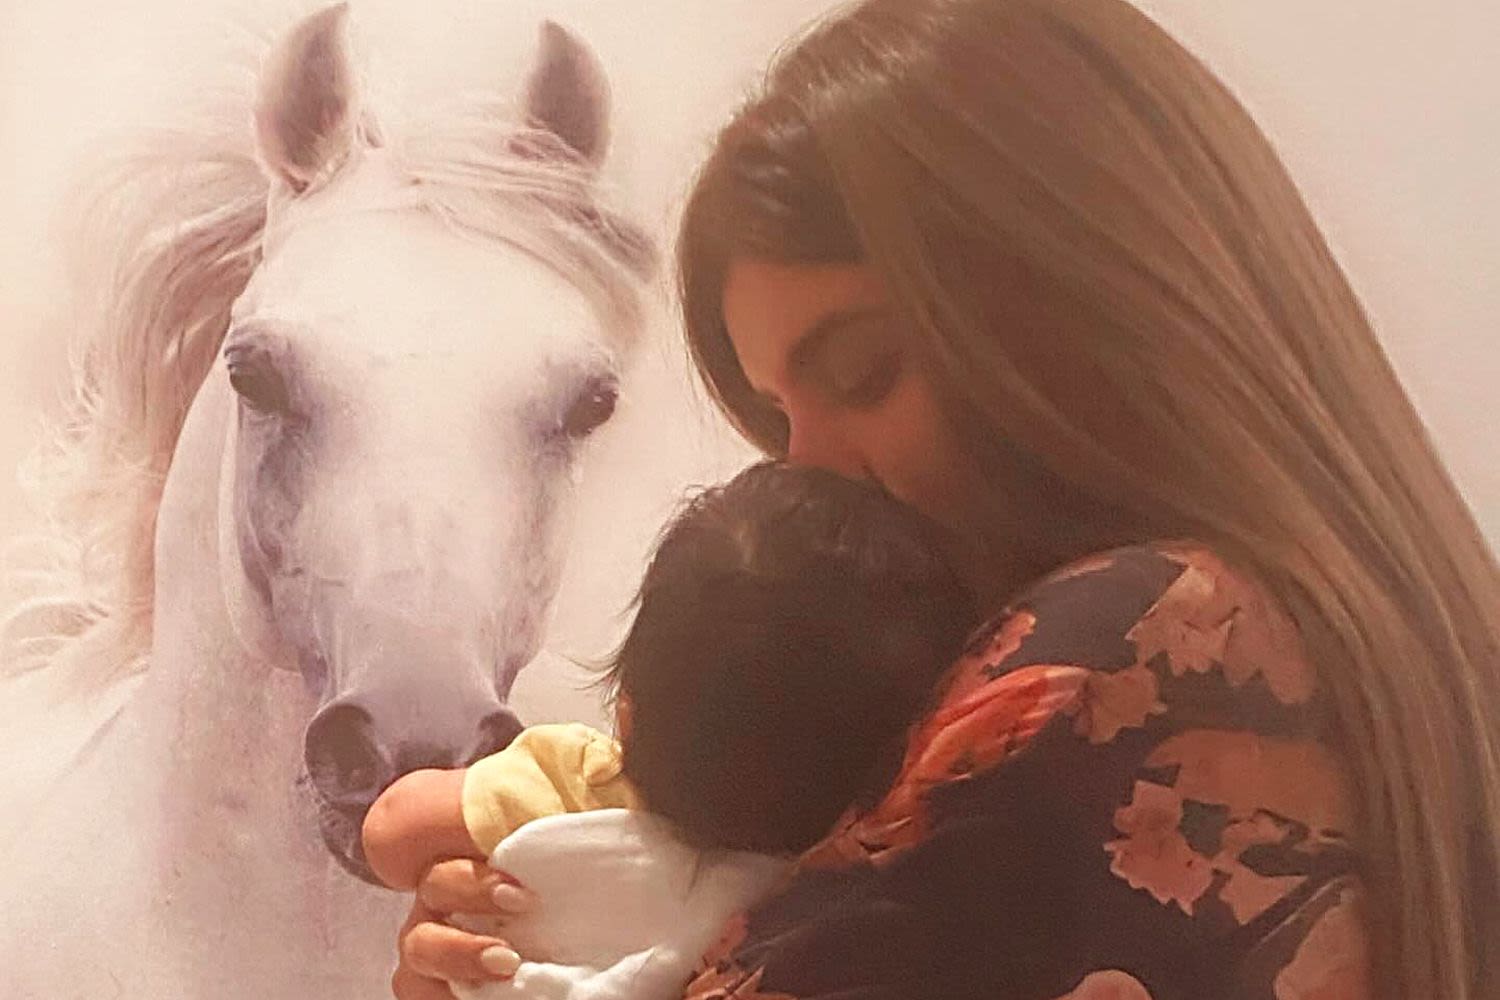 Dubai Princess Shares New Photo with Baby Daughter After Declaring Divorce on Instagram